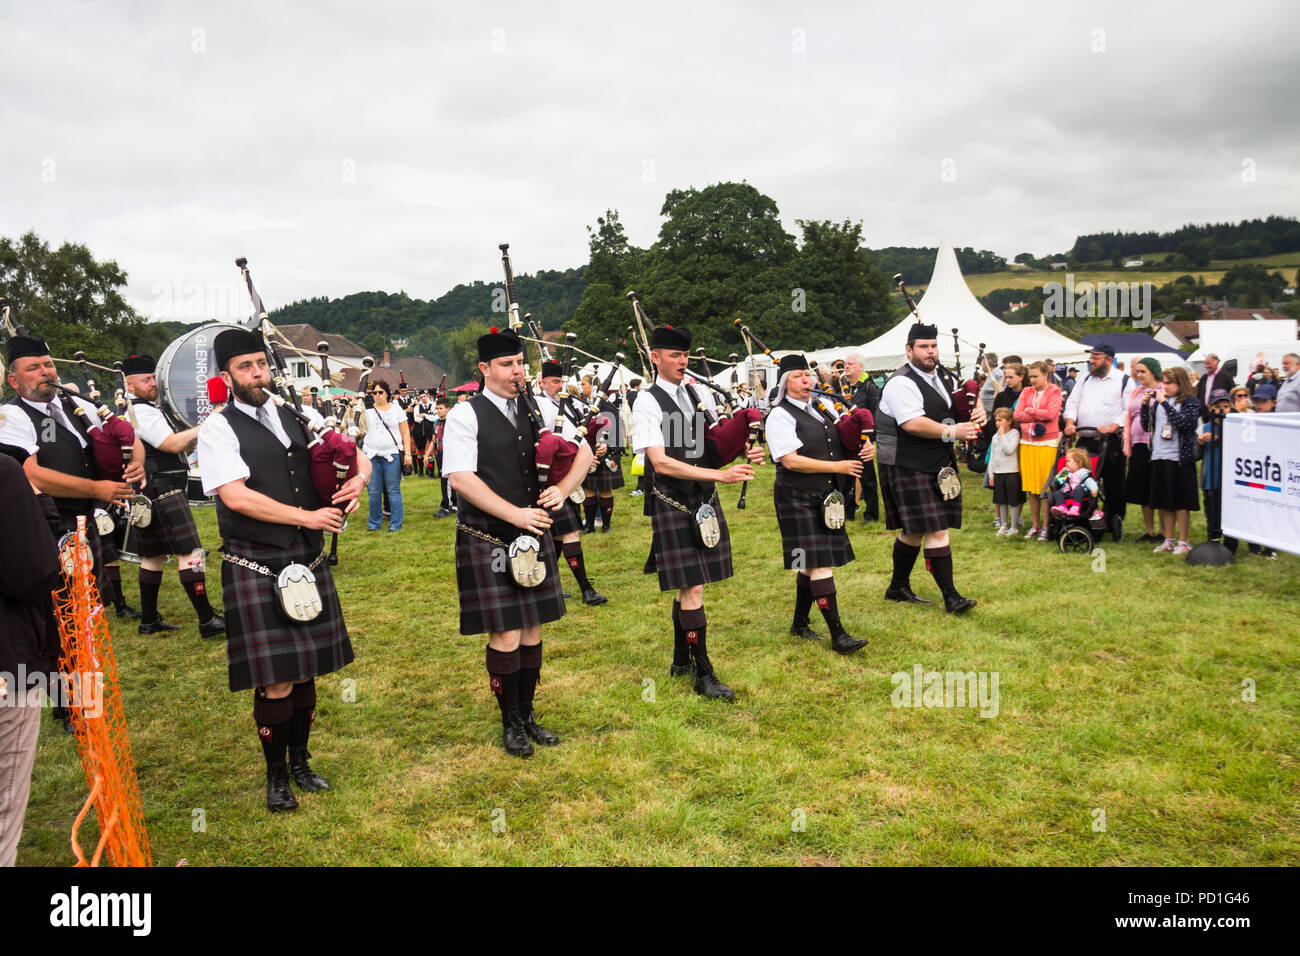 Stirling, Scotland, UK. 5th August 2018. Strathallan Games Park near Stirling is the venue for the 167th Bridge of Allan Highland Games.  Members of the Glenrothes and District Pipe Band march towards the main show ring to take part in the pipe band competition. Credit Joseph Clemson, JY News Images/Alamy Live News. Stock Photo